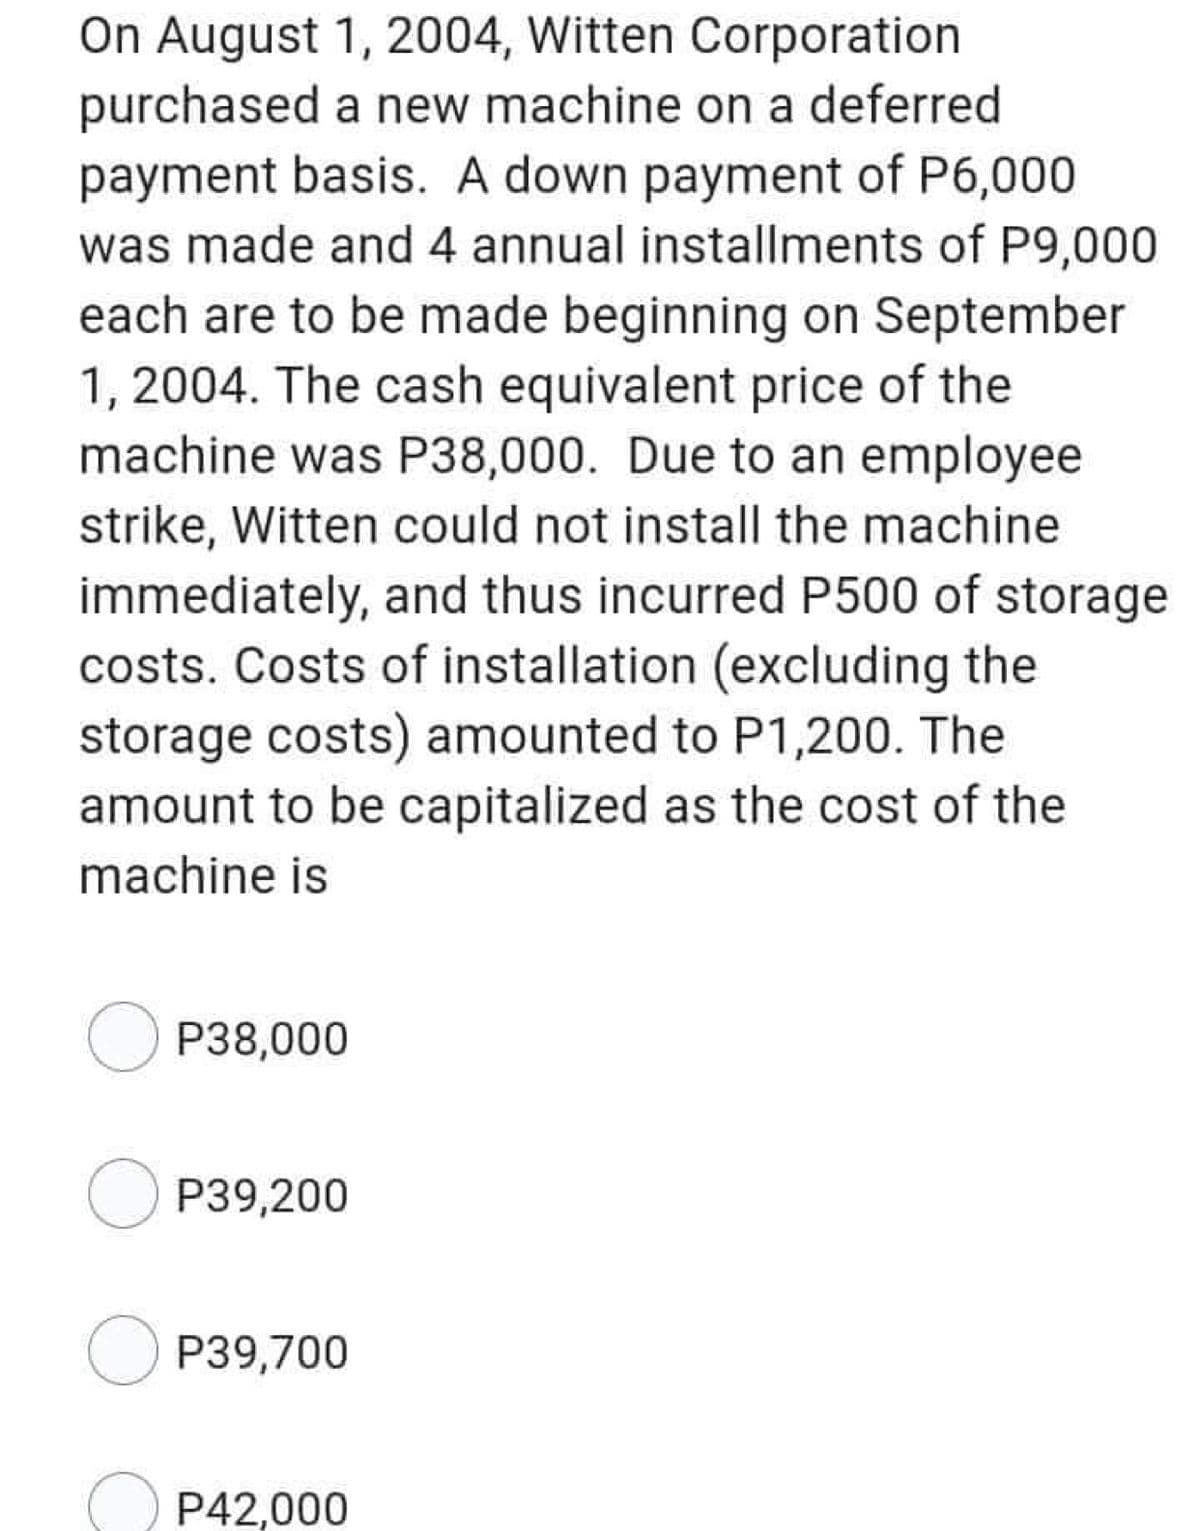 On August 1, 2004, Witten Corporation
purchased a new machine on a deferred
payment basis. A down payment of P6,000
was made and 4 annual installments of P9,000
each are to be made beginning on September
1, 2004. The cash equivalent price of the
machine was P38,000. Due to an employee
strike, Witten could not install the machine
immediately, and thus incurred P500 of storage
costs. Costs of installation (excluding the
storage costs) amounted to P1,200. The
amount to be capitalized as the cost of the
machine is
OP38,000
OP39,200
OP39,700
P42,000